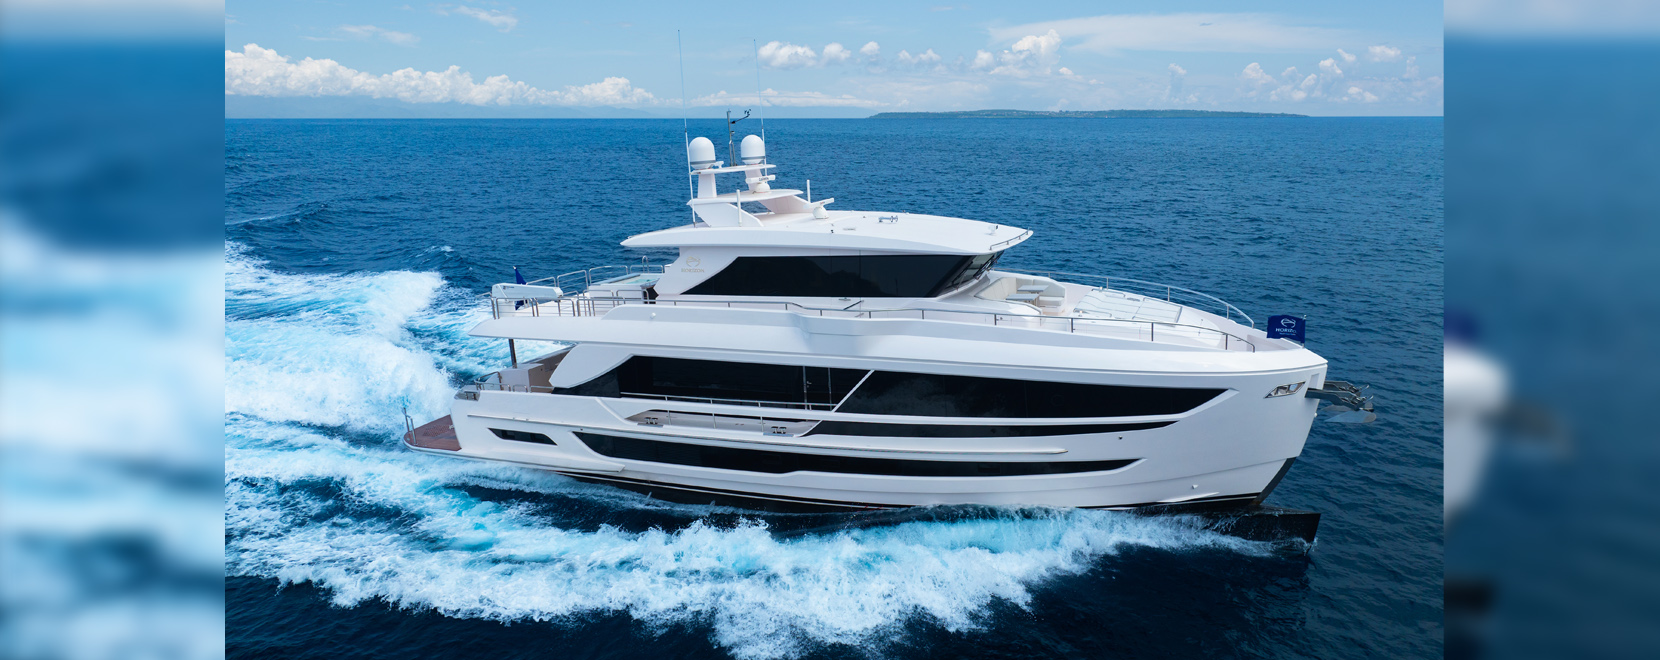 Horizon Yacht USA invites you to its Summer Open House on July 18-19 at Hall of Fame Marina in Fort Lauderdale, featuring new and previously owned Horizon yachts.